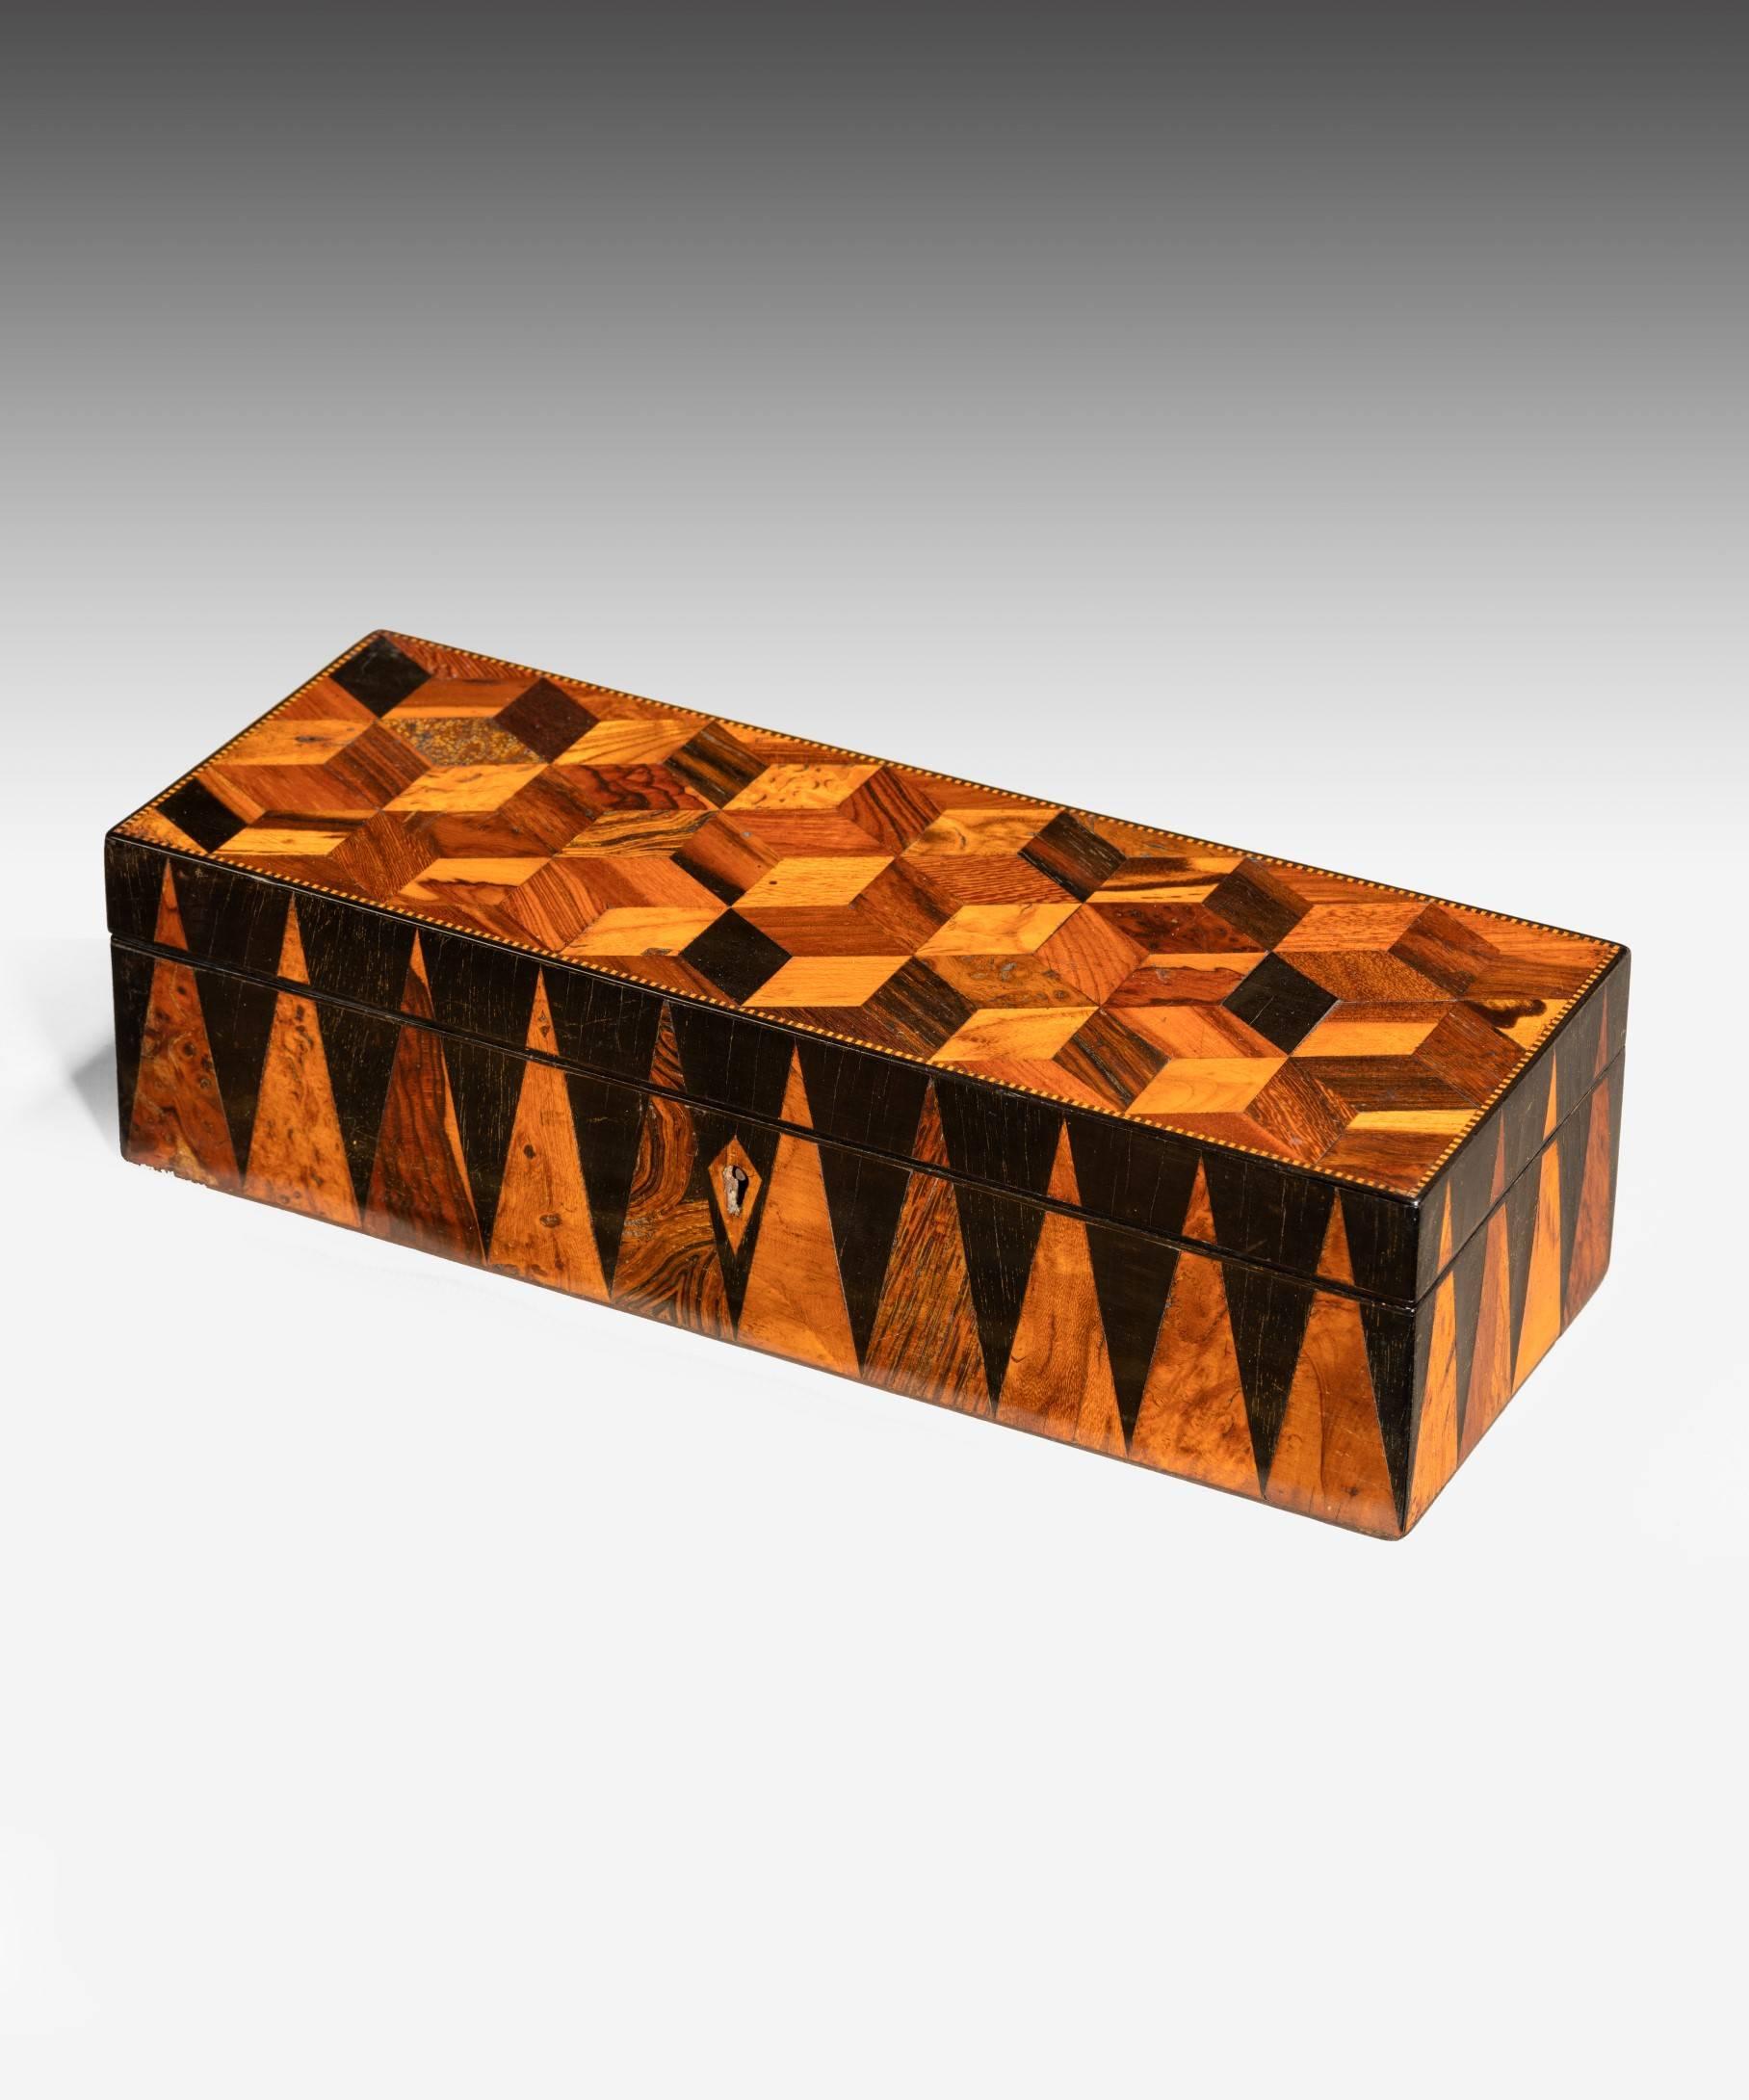 An early 19th century Tunbridge ware glove box; the lid veneered with perspective cube parquetry and the sides with Vandyke’s all executed in various specimen woods. Ideal for storing cuff links, watches, etc.